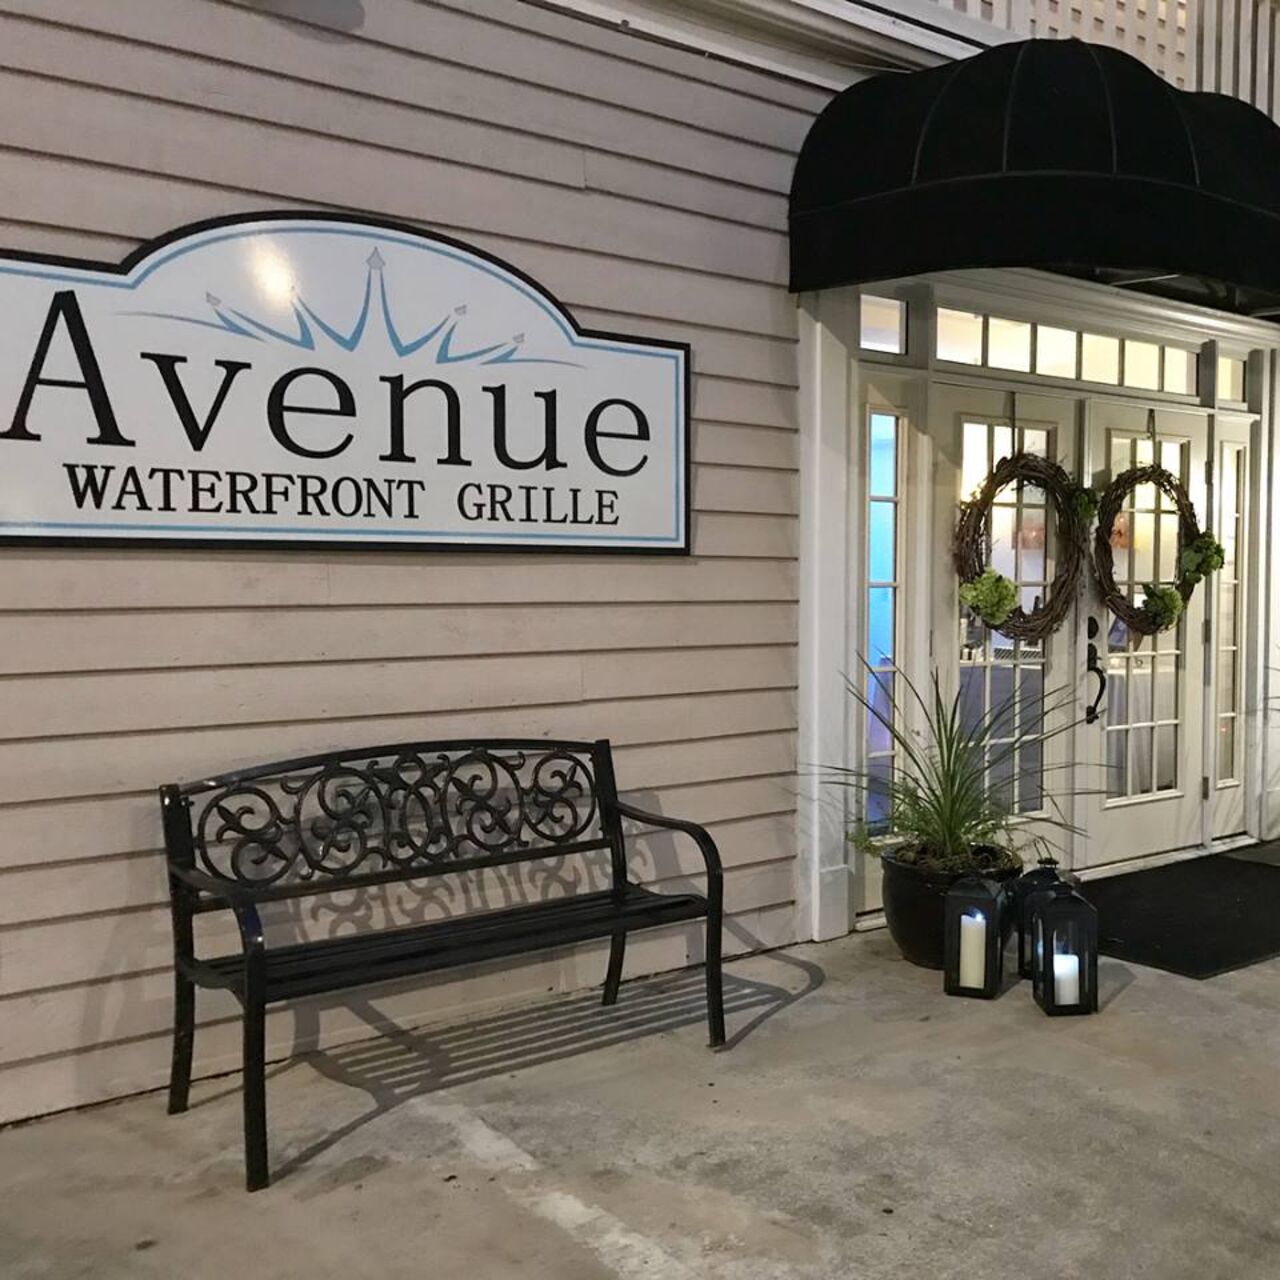 A photo of Avenue Waterfront Grille